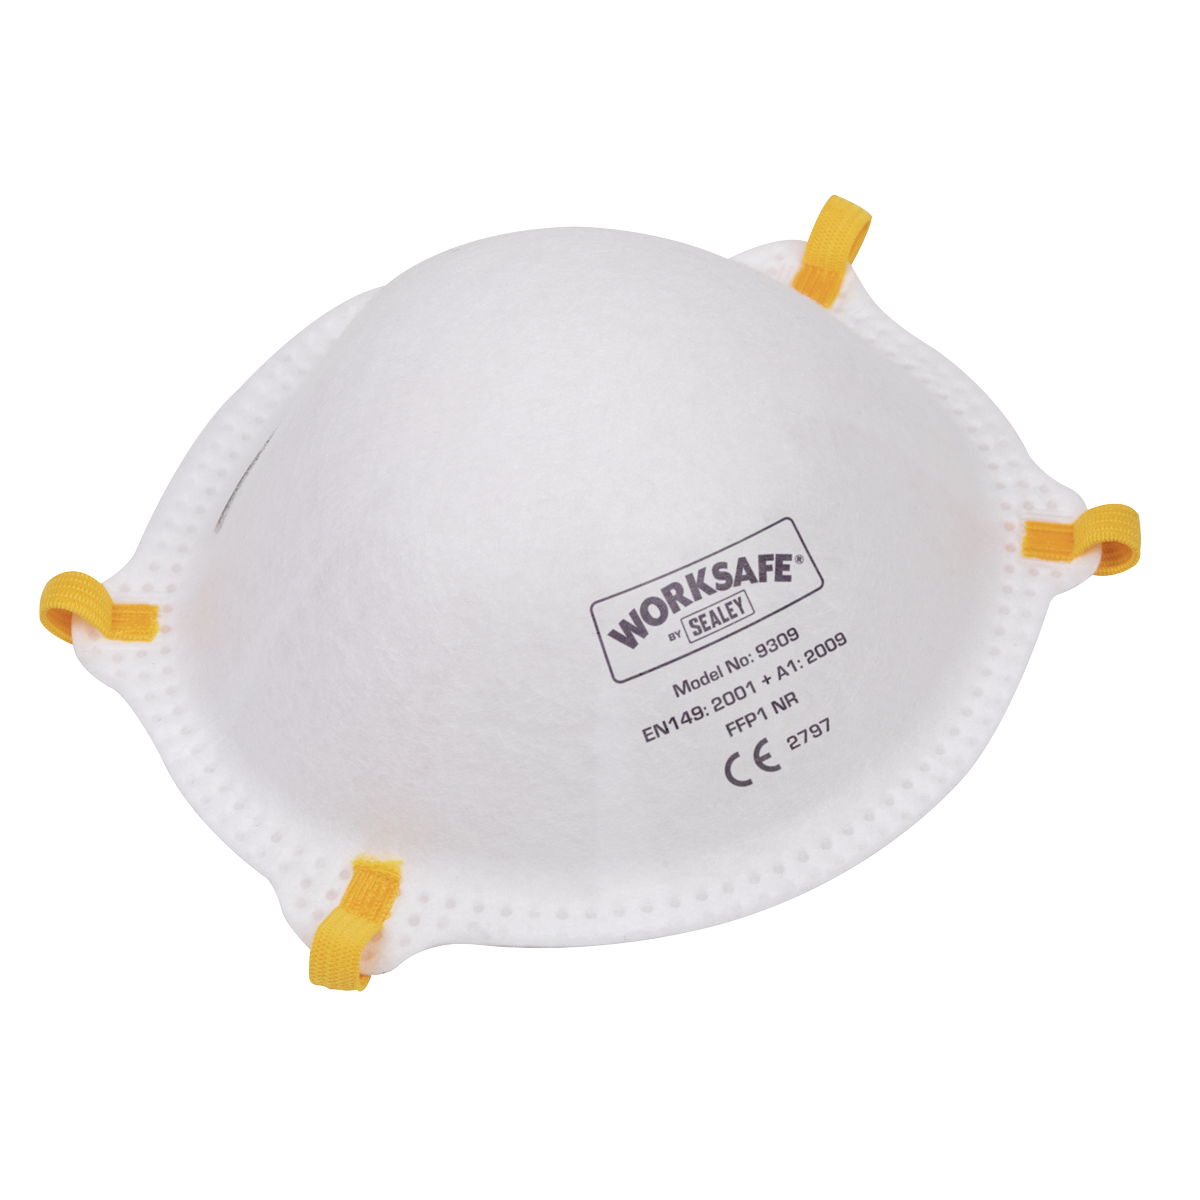 Cup Mask FFP1 - Pack of 10 - 9309/10 - Farming Parts